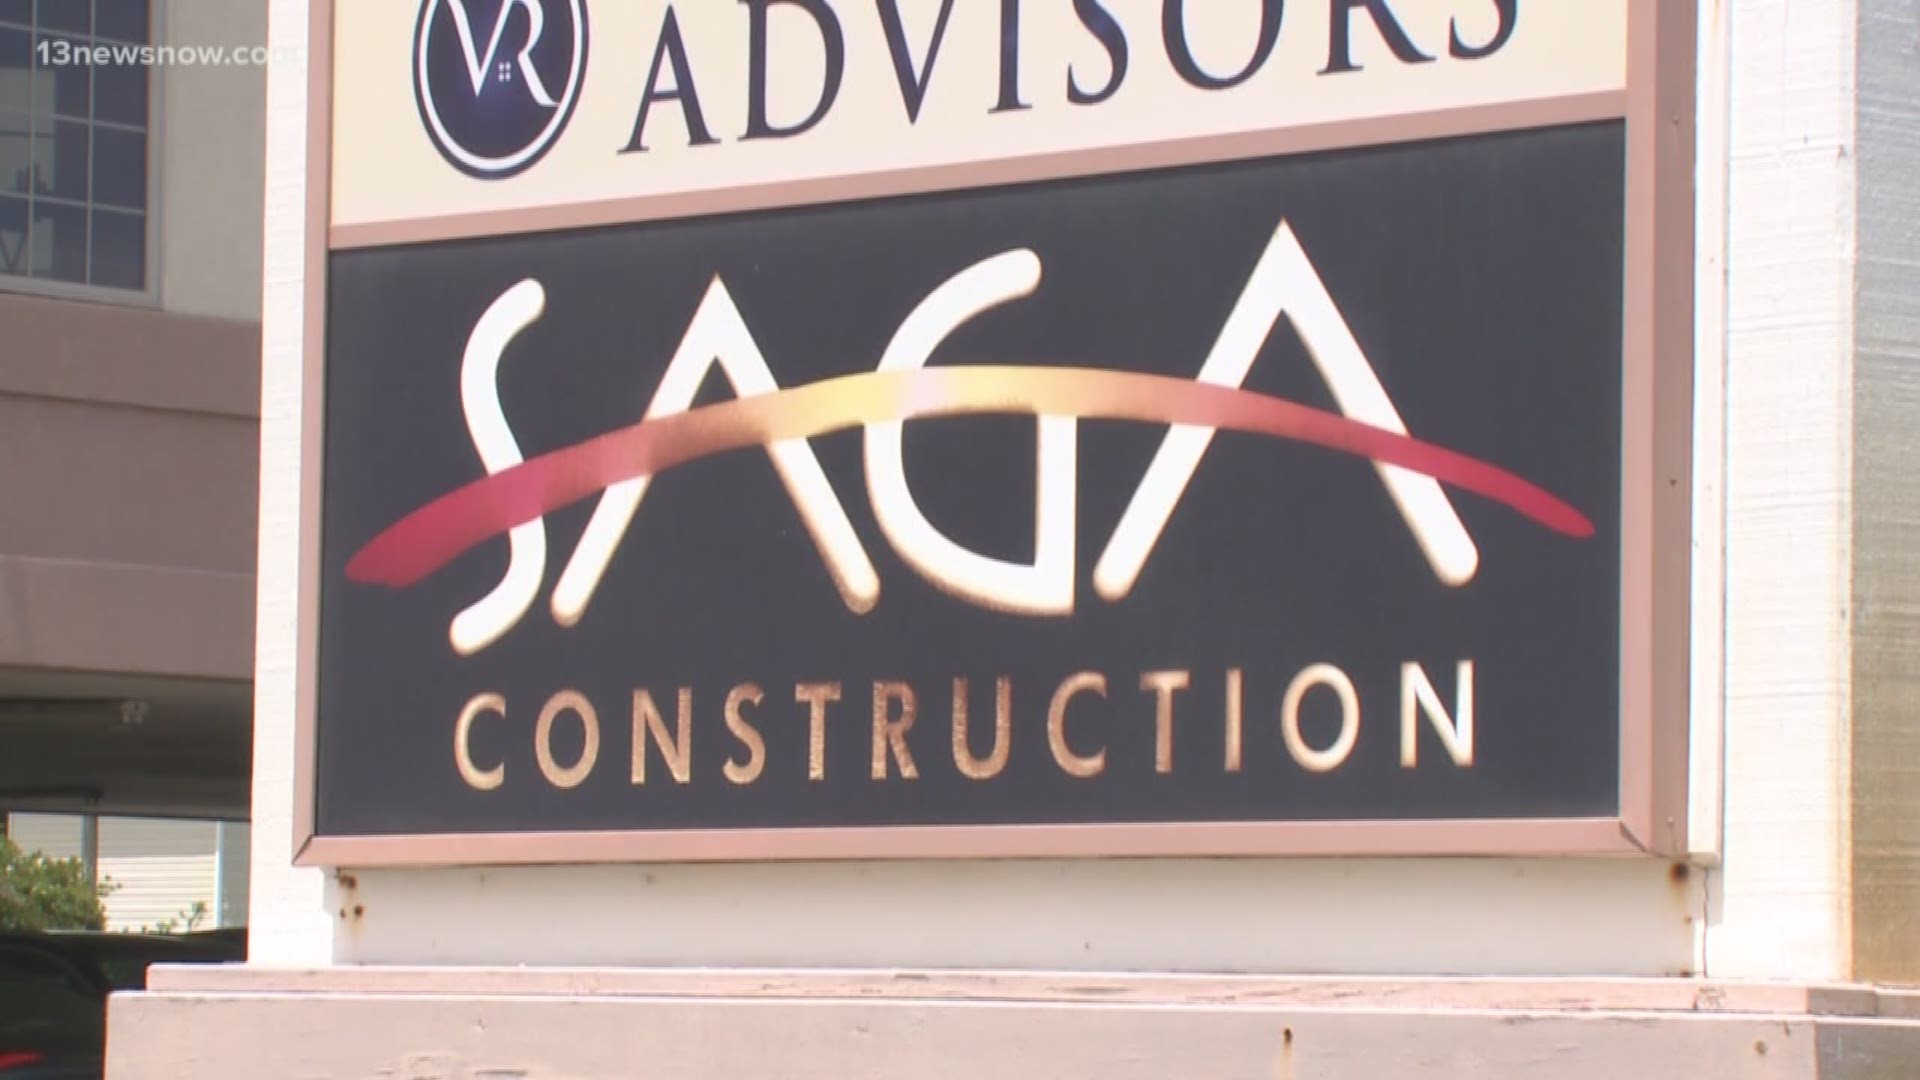 SAGA Realty and Construction proposed the hotel and some locals think it's a great opportunity, but others don't believe it's consistent with the traditions of Hatteras Village.